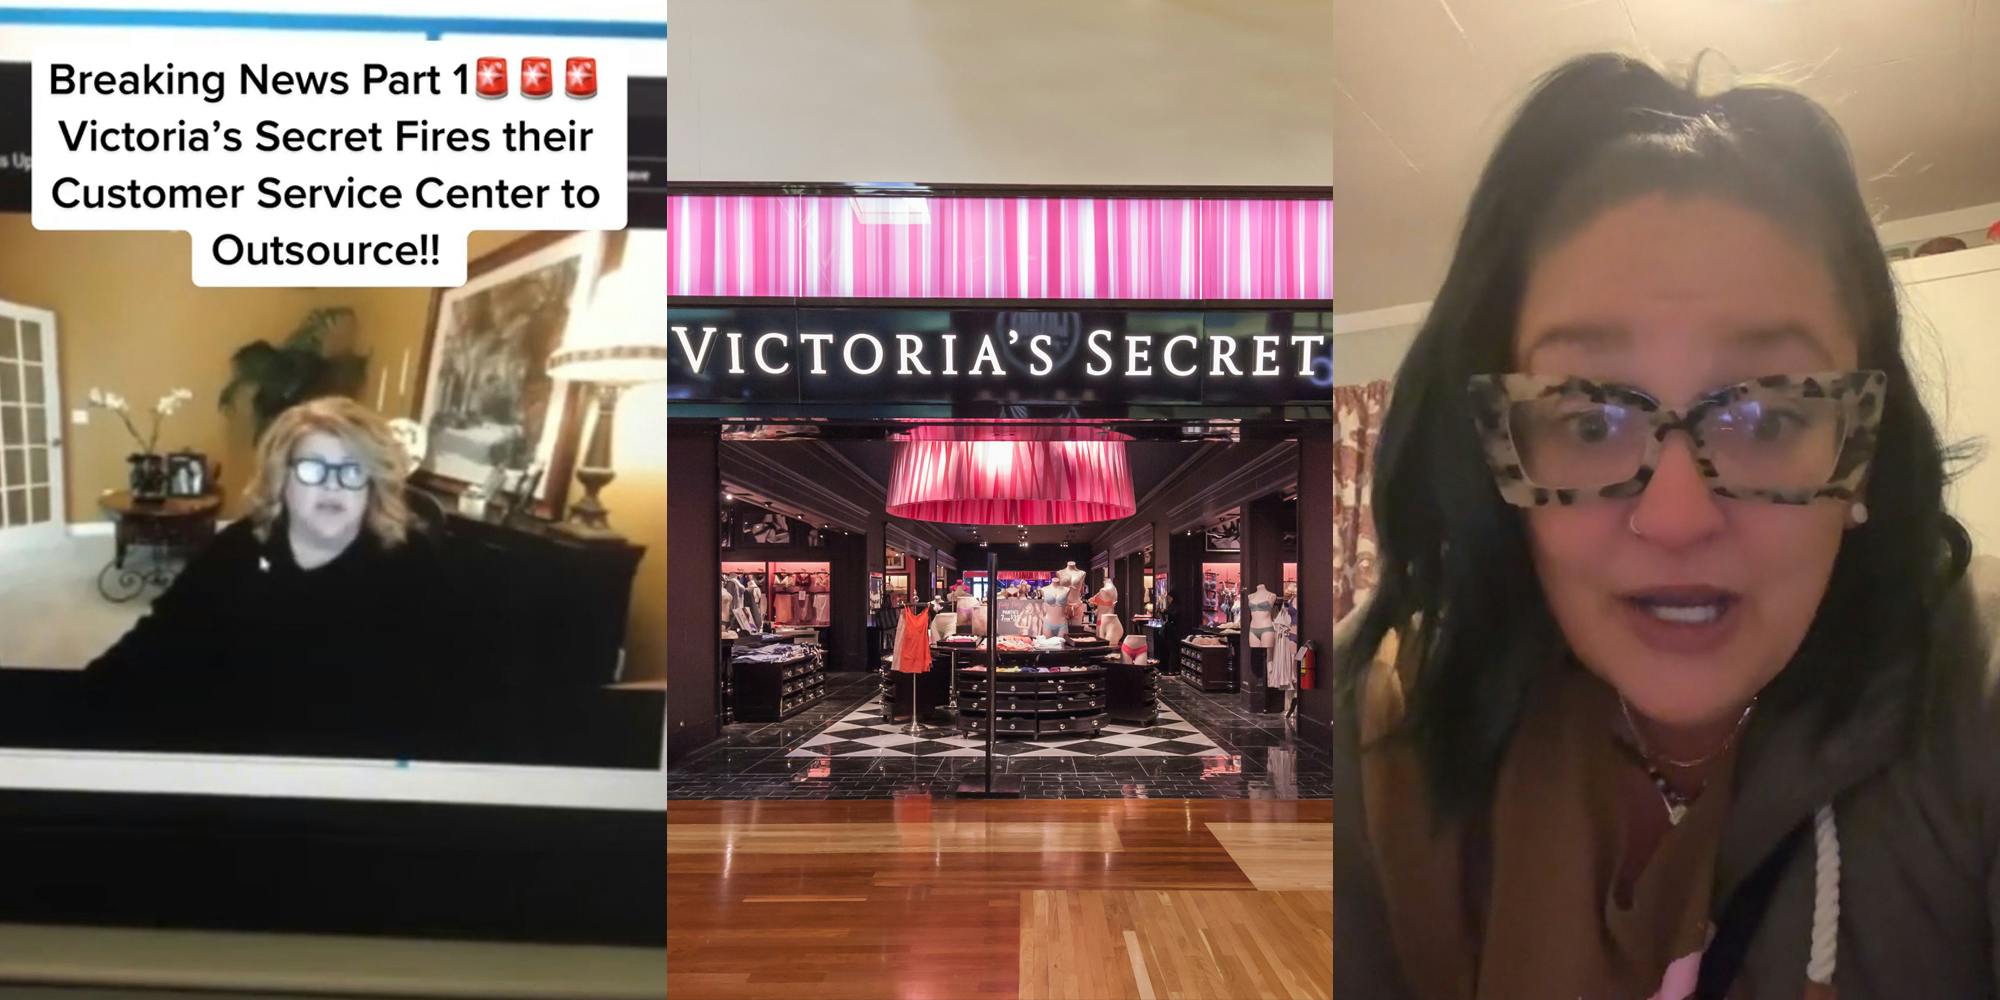 meeting on laptop with caption "Breaking News Part1 Victoria's Secret Fires their Customer Service Center to Outsource!!" (l) Victoria's Secret store in mall with sign (c) former Victoria's Secret employee speaking (r)